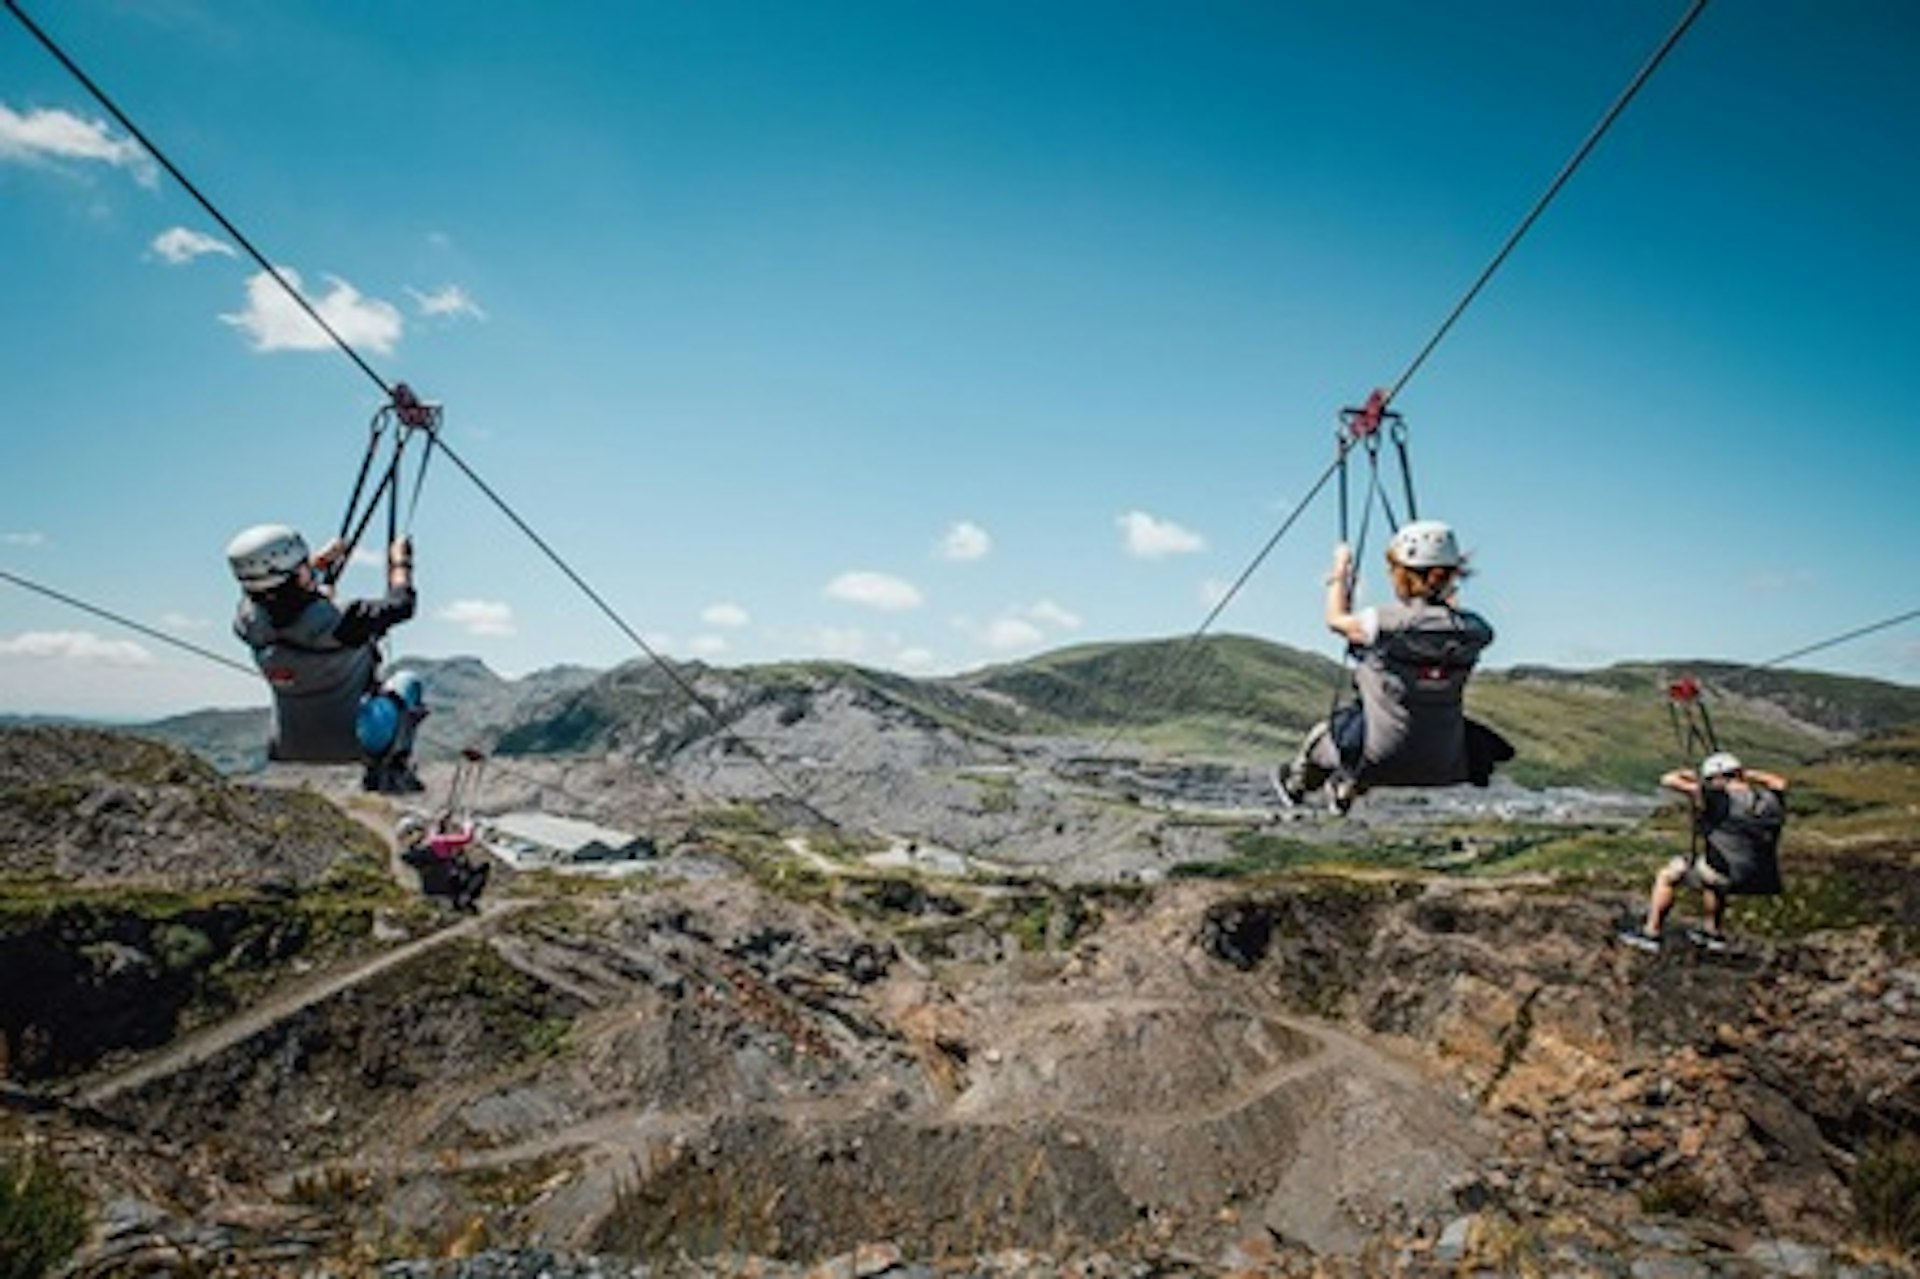 Fly the Phoenix - The World's Fastest Seated Zip Line at Zip World for Two 2